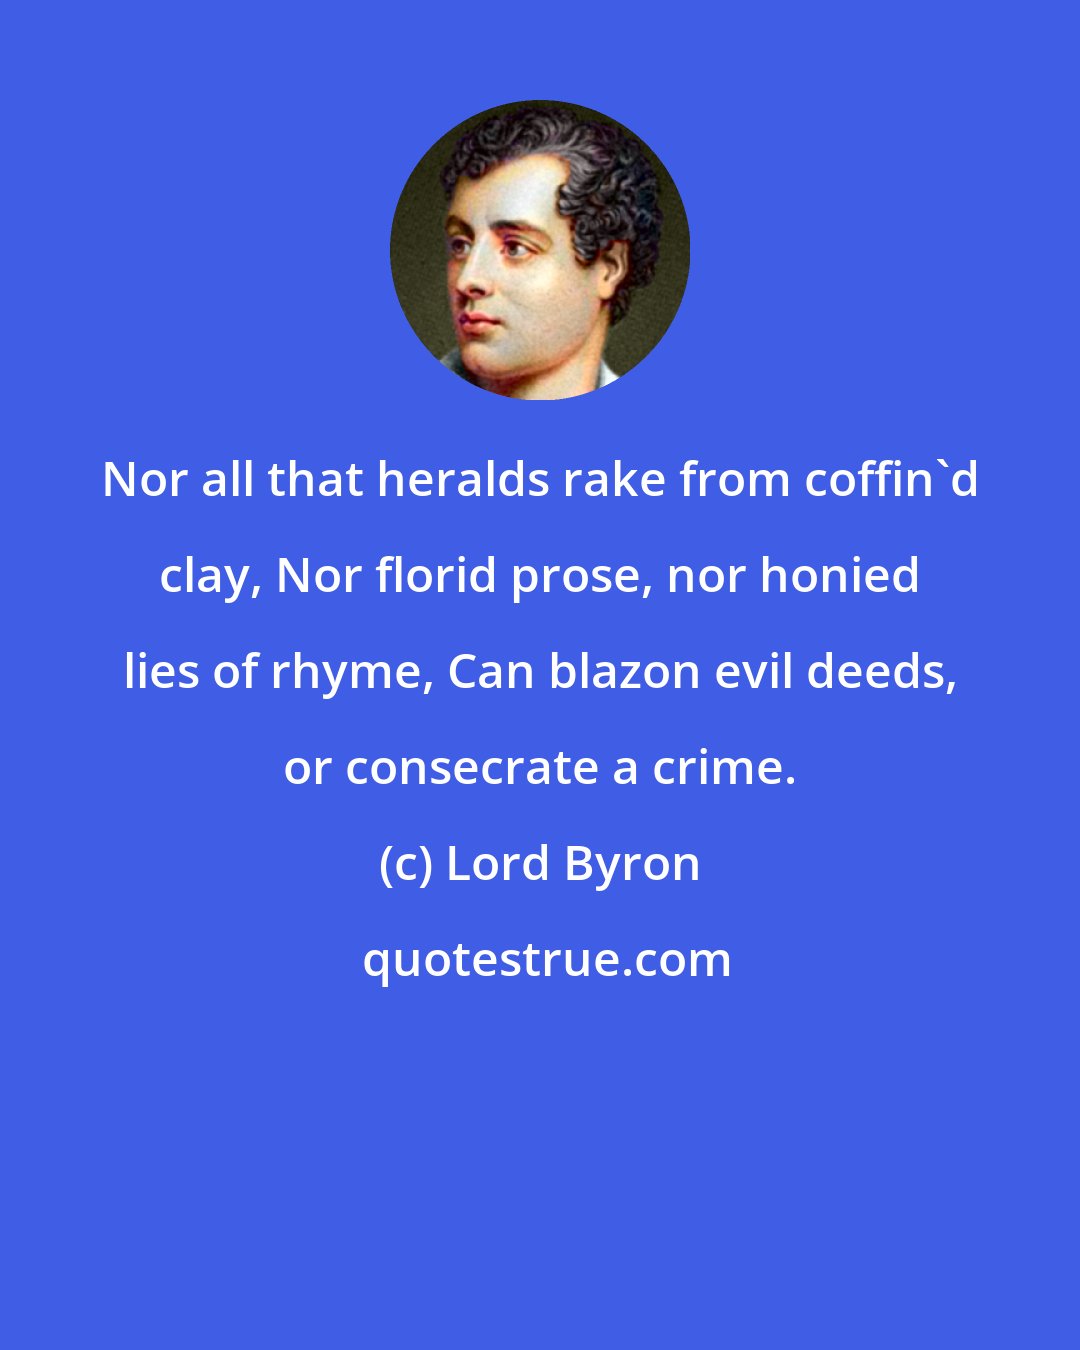 Lord Byron: Nor all that heralds rake from coffin'd clay, Nor florid prose, nor honied lies of rhyme, Can blazon evil deeds, or consecrate a crime.